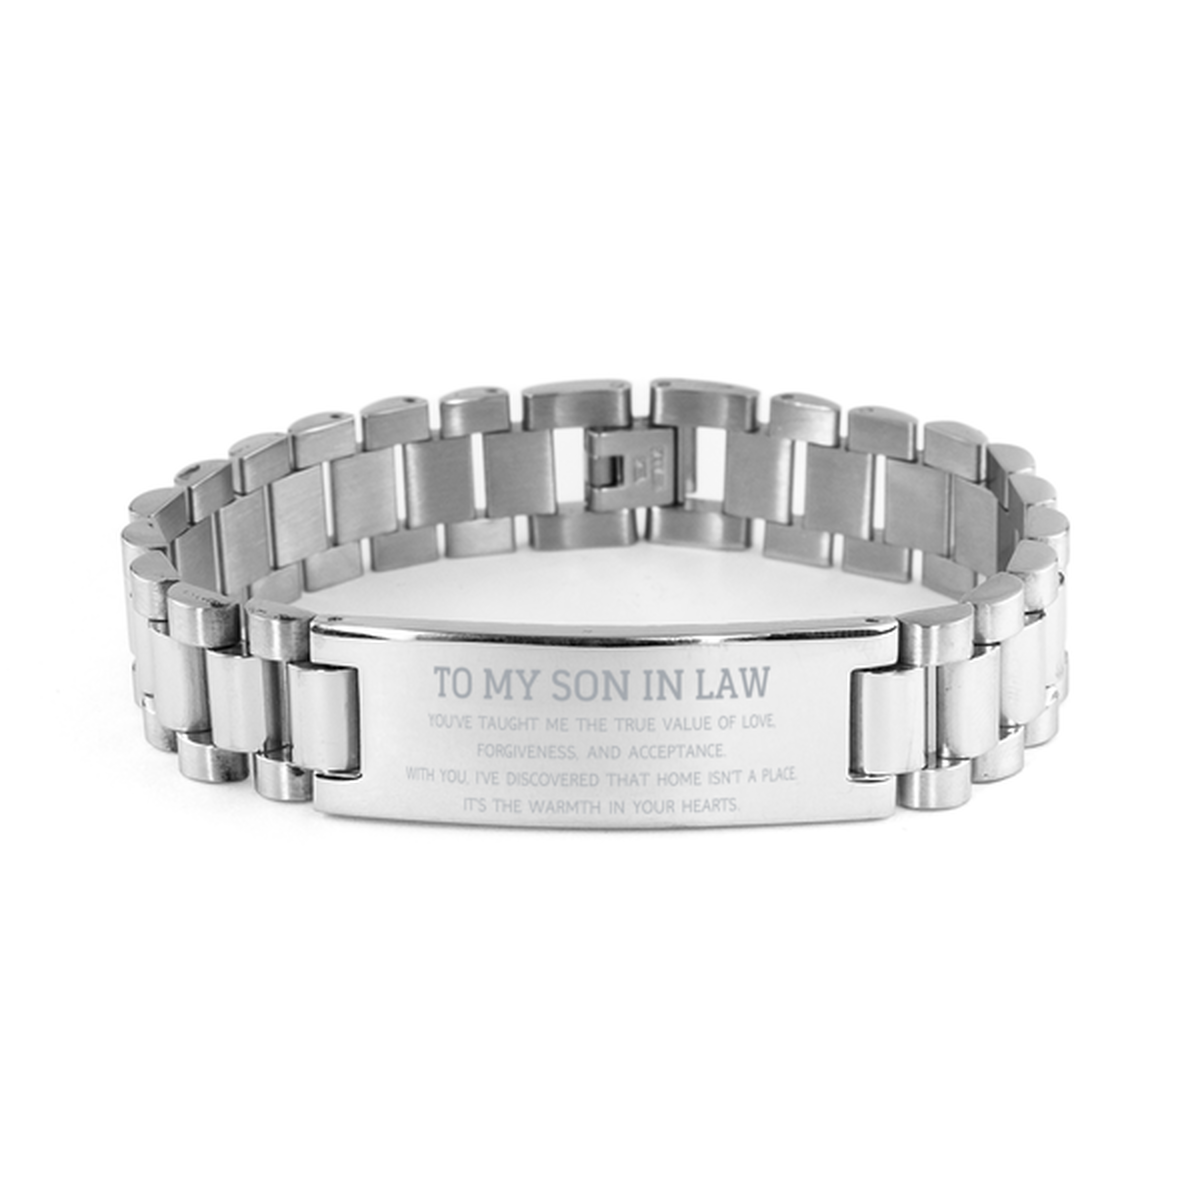 To My Son In Law Gifts, You've taught me the true value of love, Thank You Gifts For Son In Law, Birthday Ladder Stainless Steel Bracelet For Son In Law